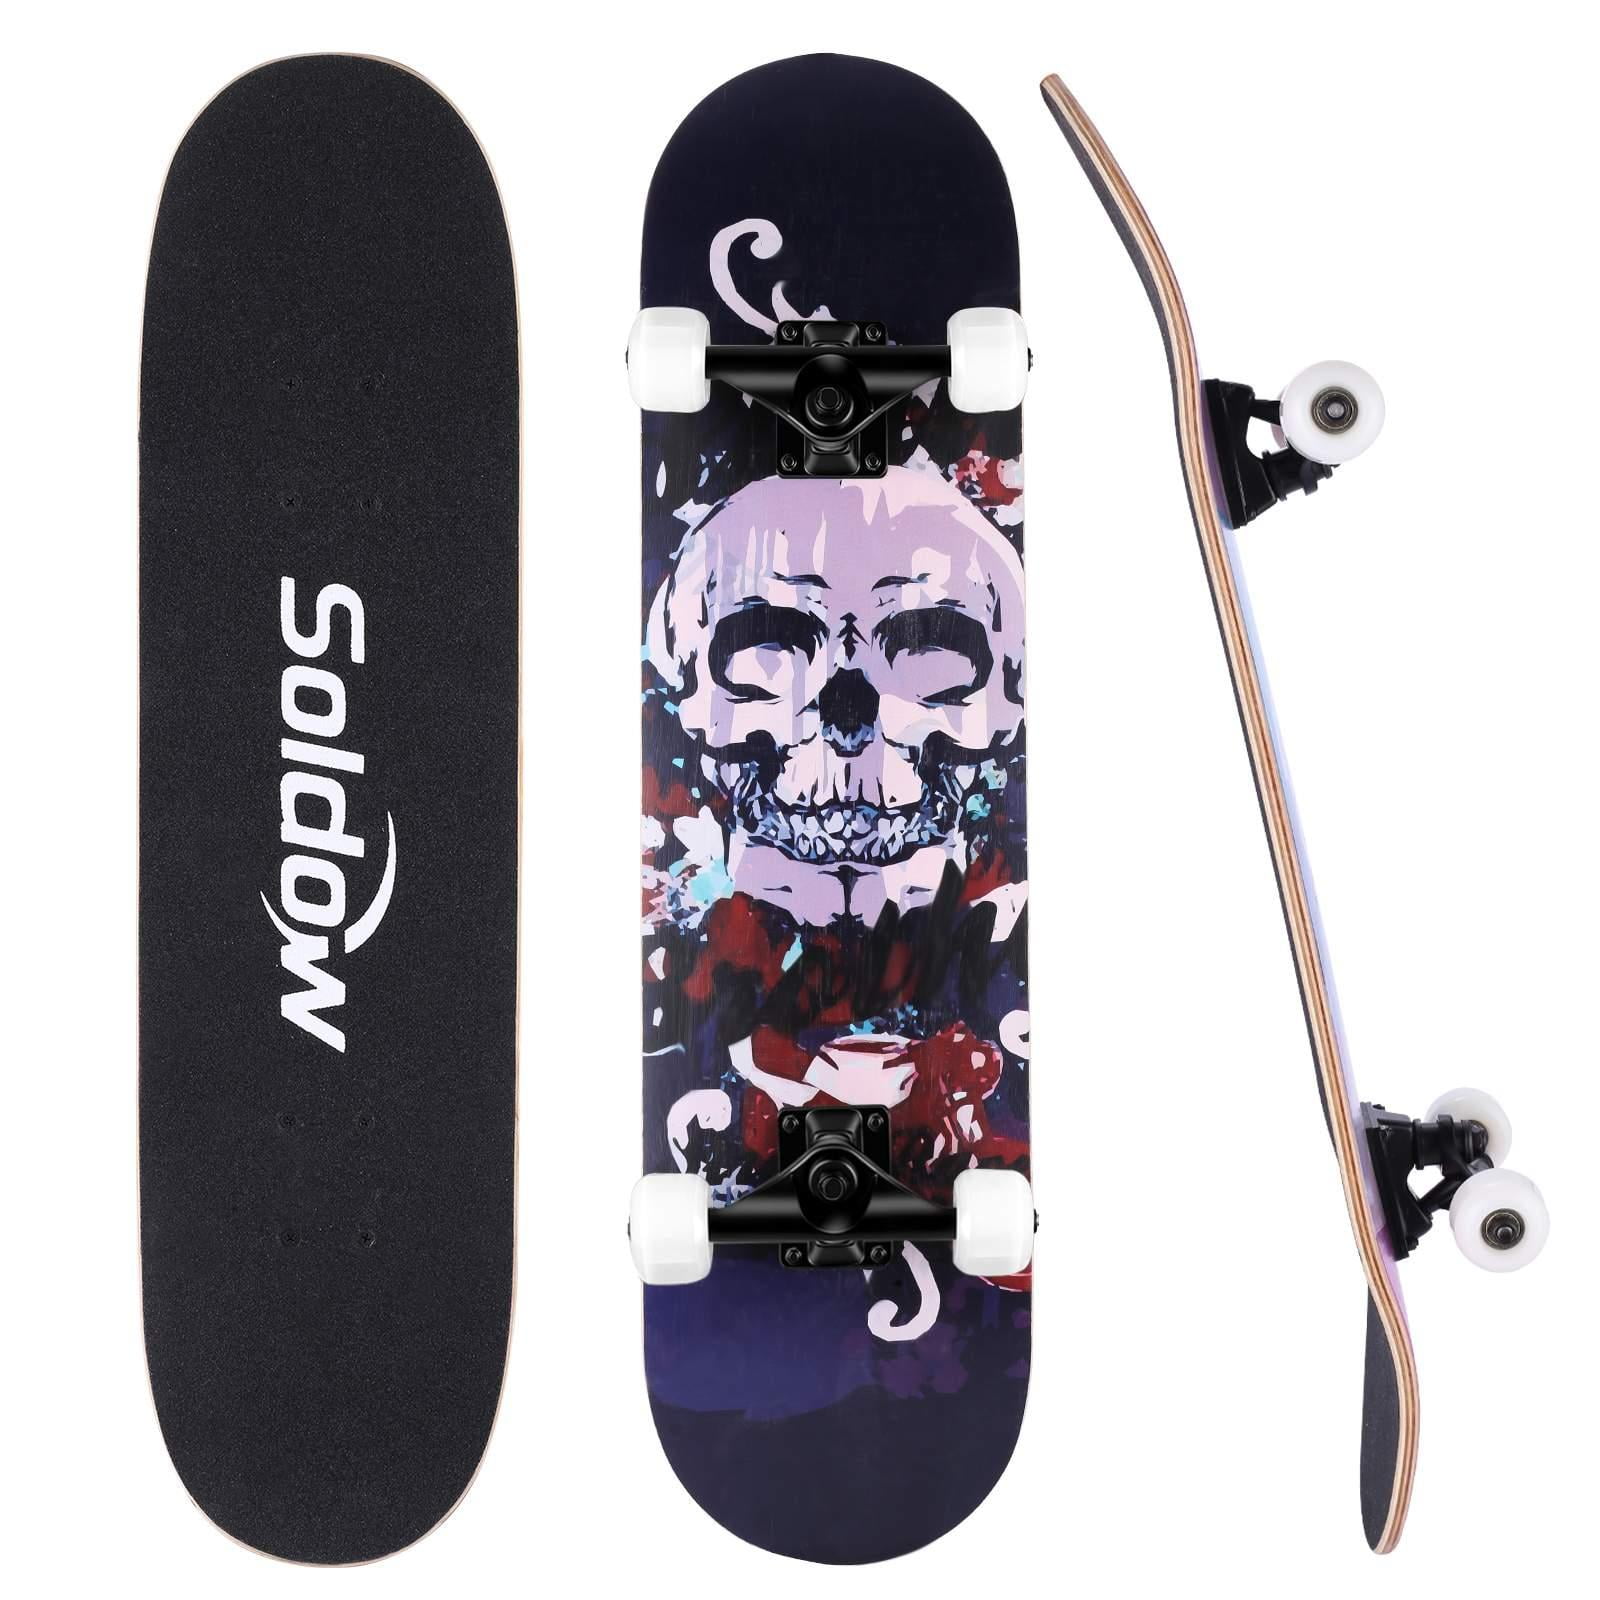 31 x 8Standard Skateboard for Kids 8 Layer Maple Pro Cruiser Complete Skateboards for Beginners Wood Double Kick Concave Skate Board for Girls Boys Teens Adults with All-in-One Skate T-Tool